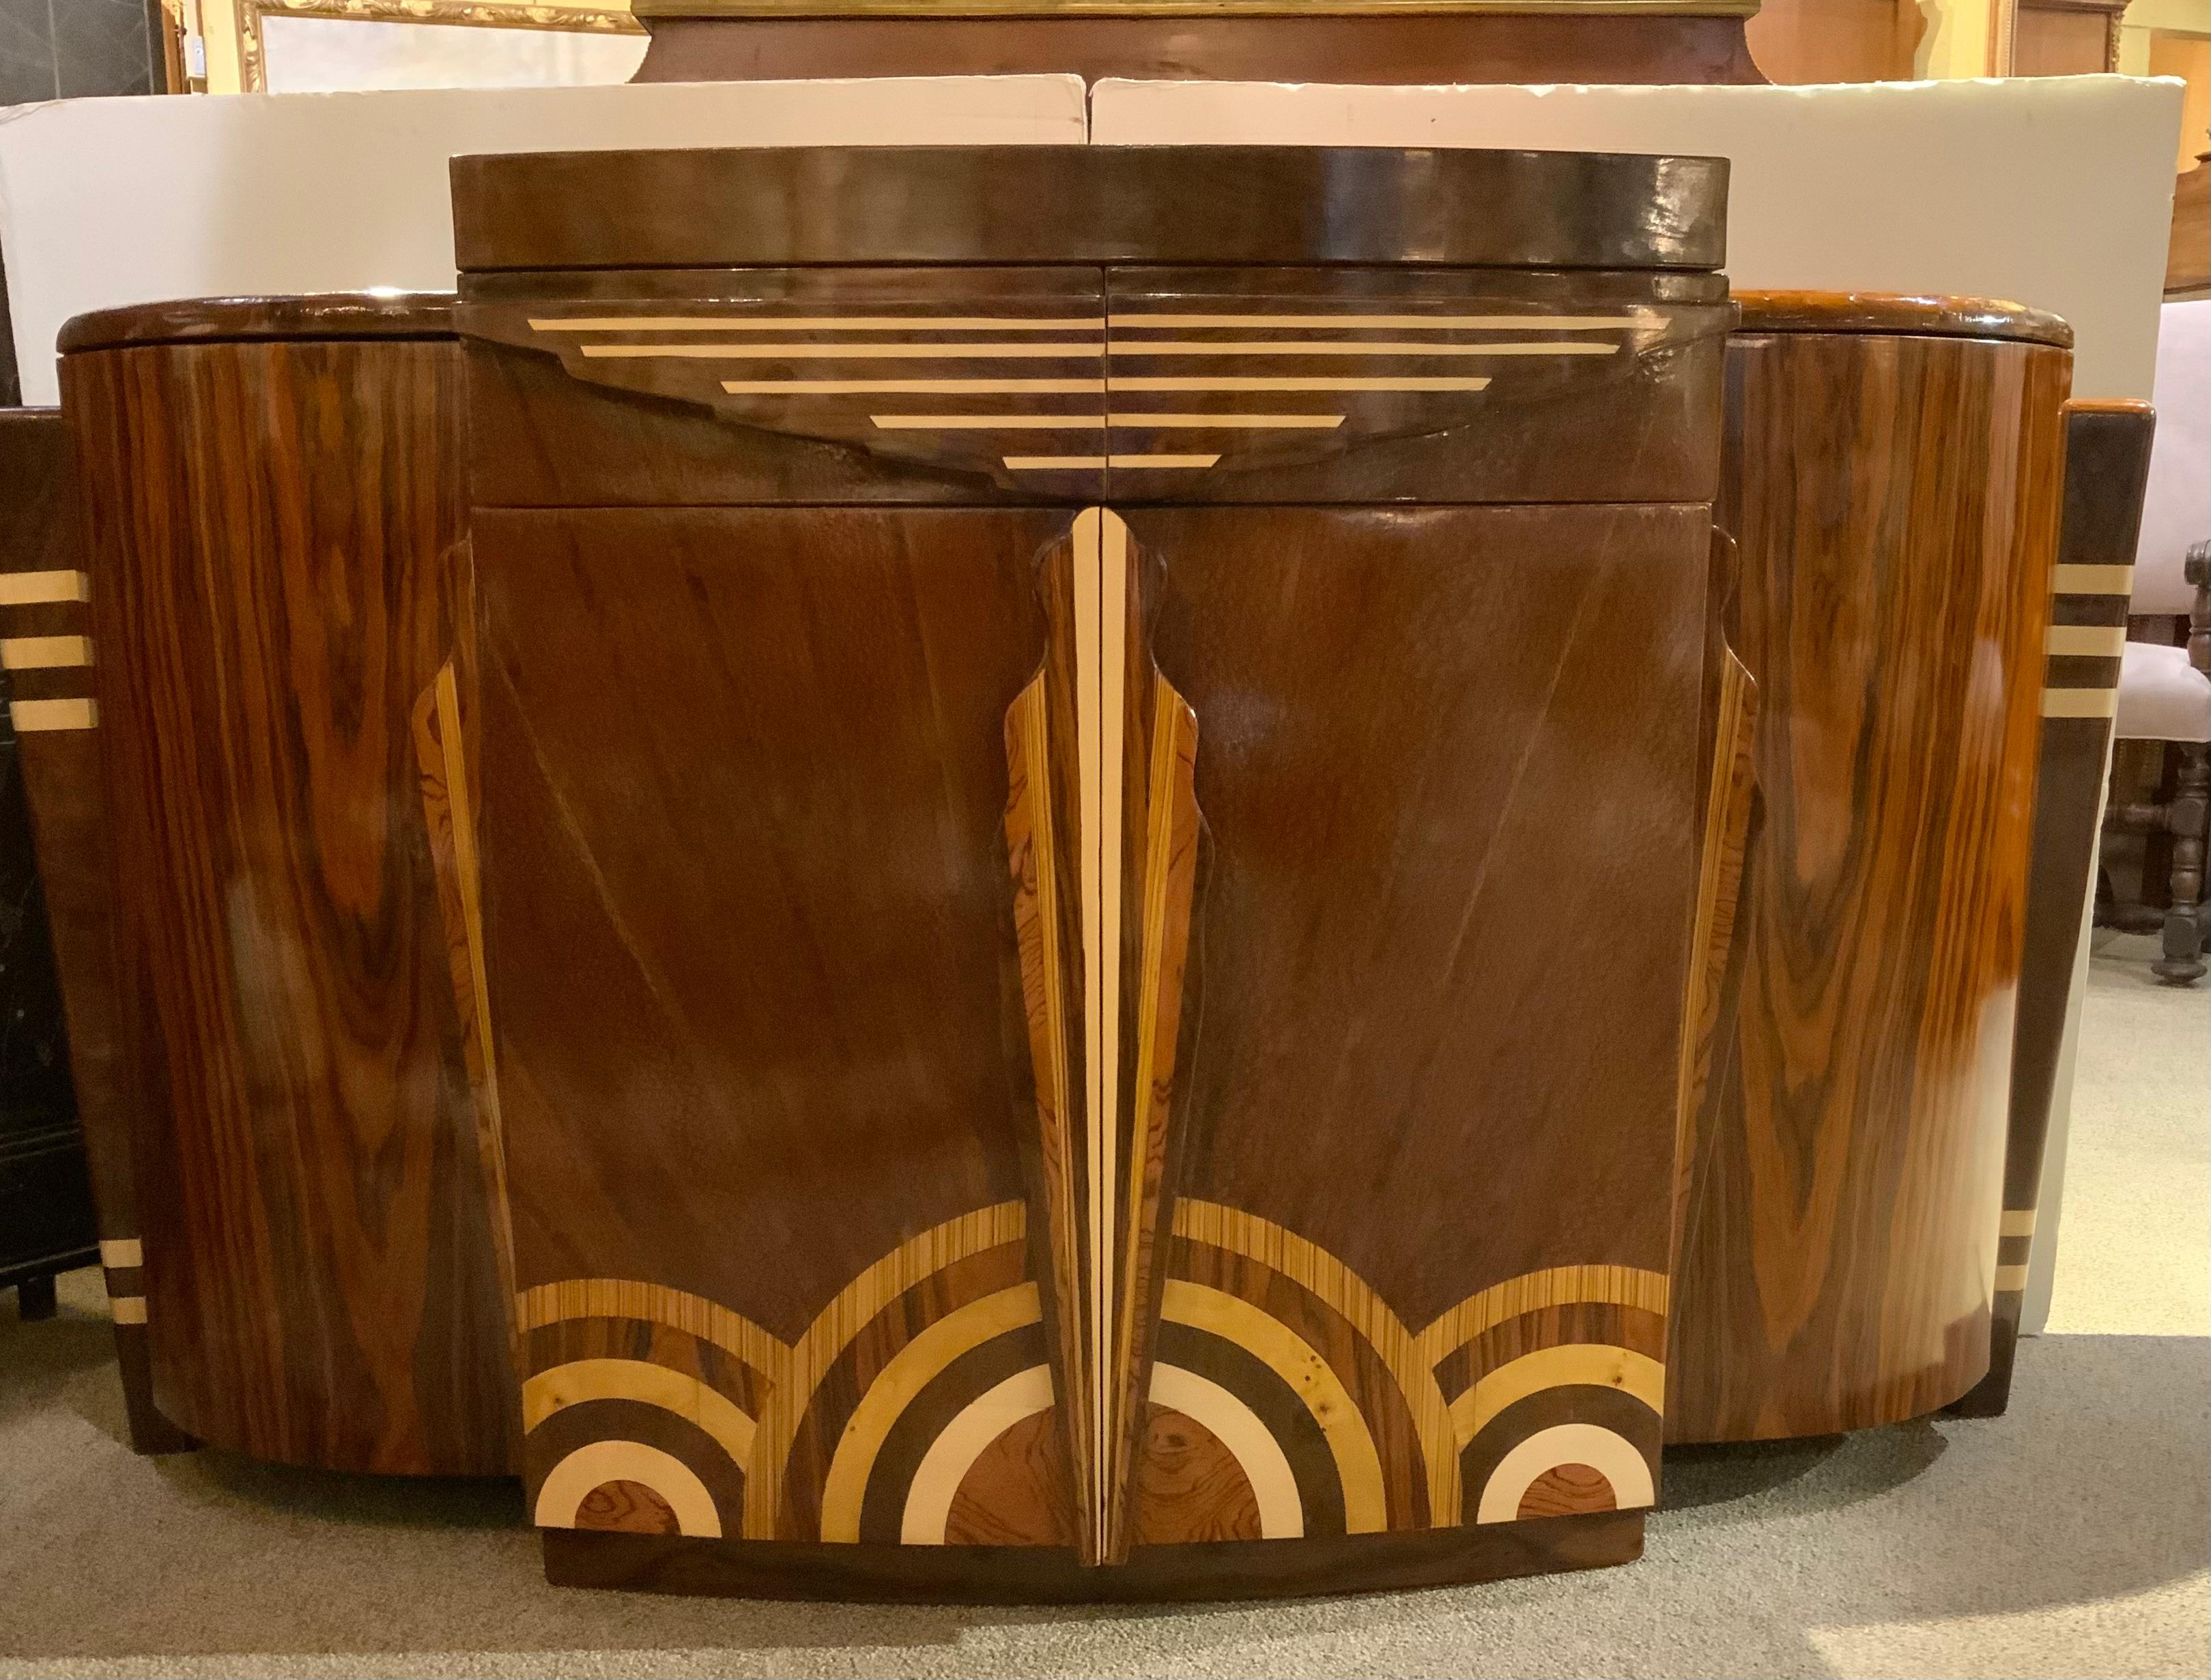 French Art Deco Style four door bar with inlaid wood